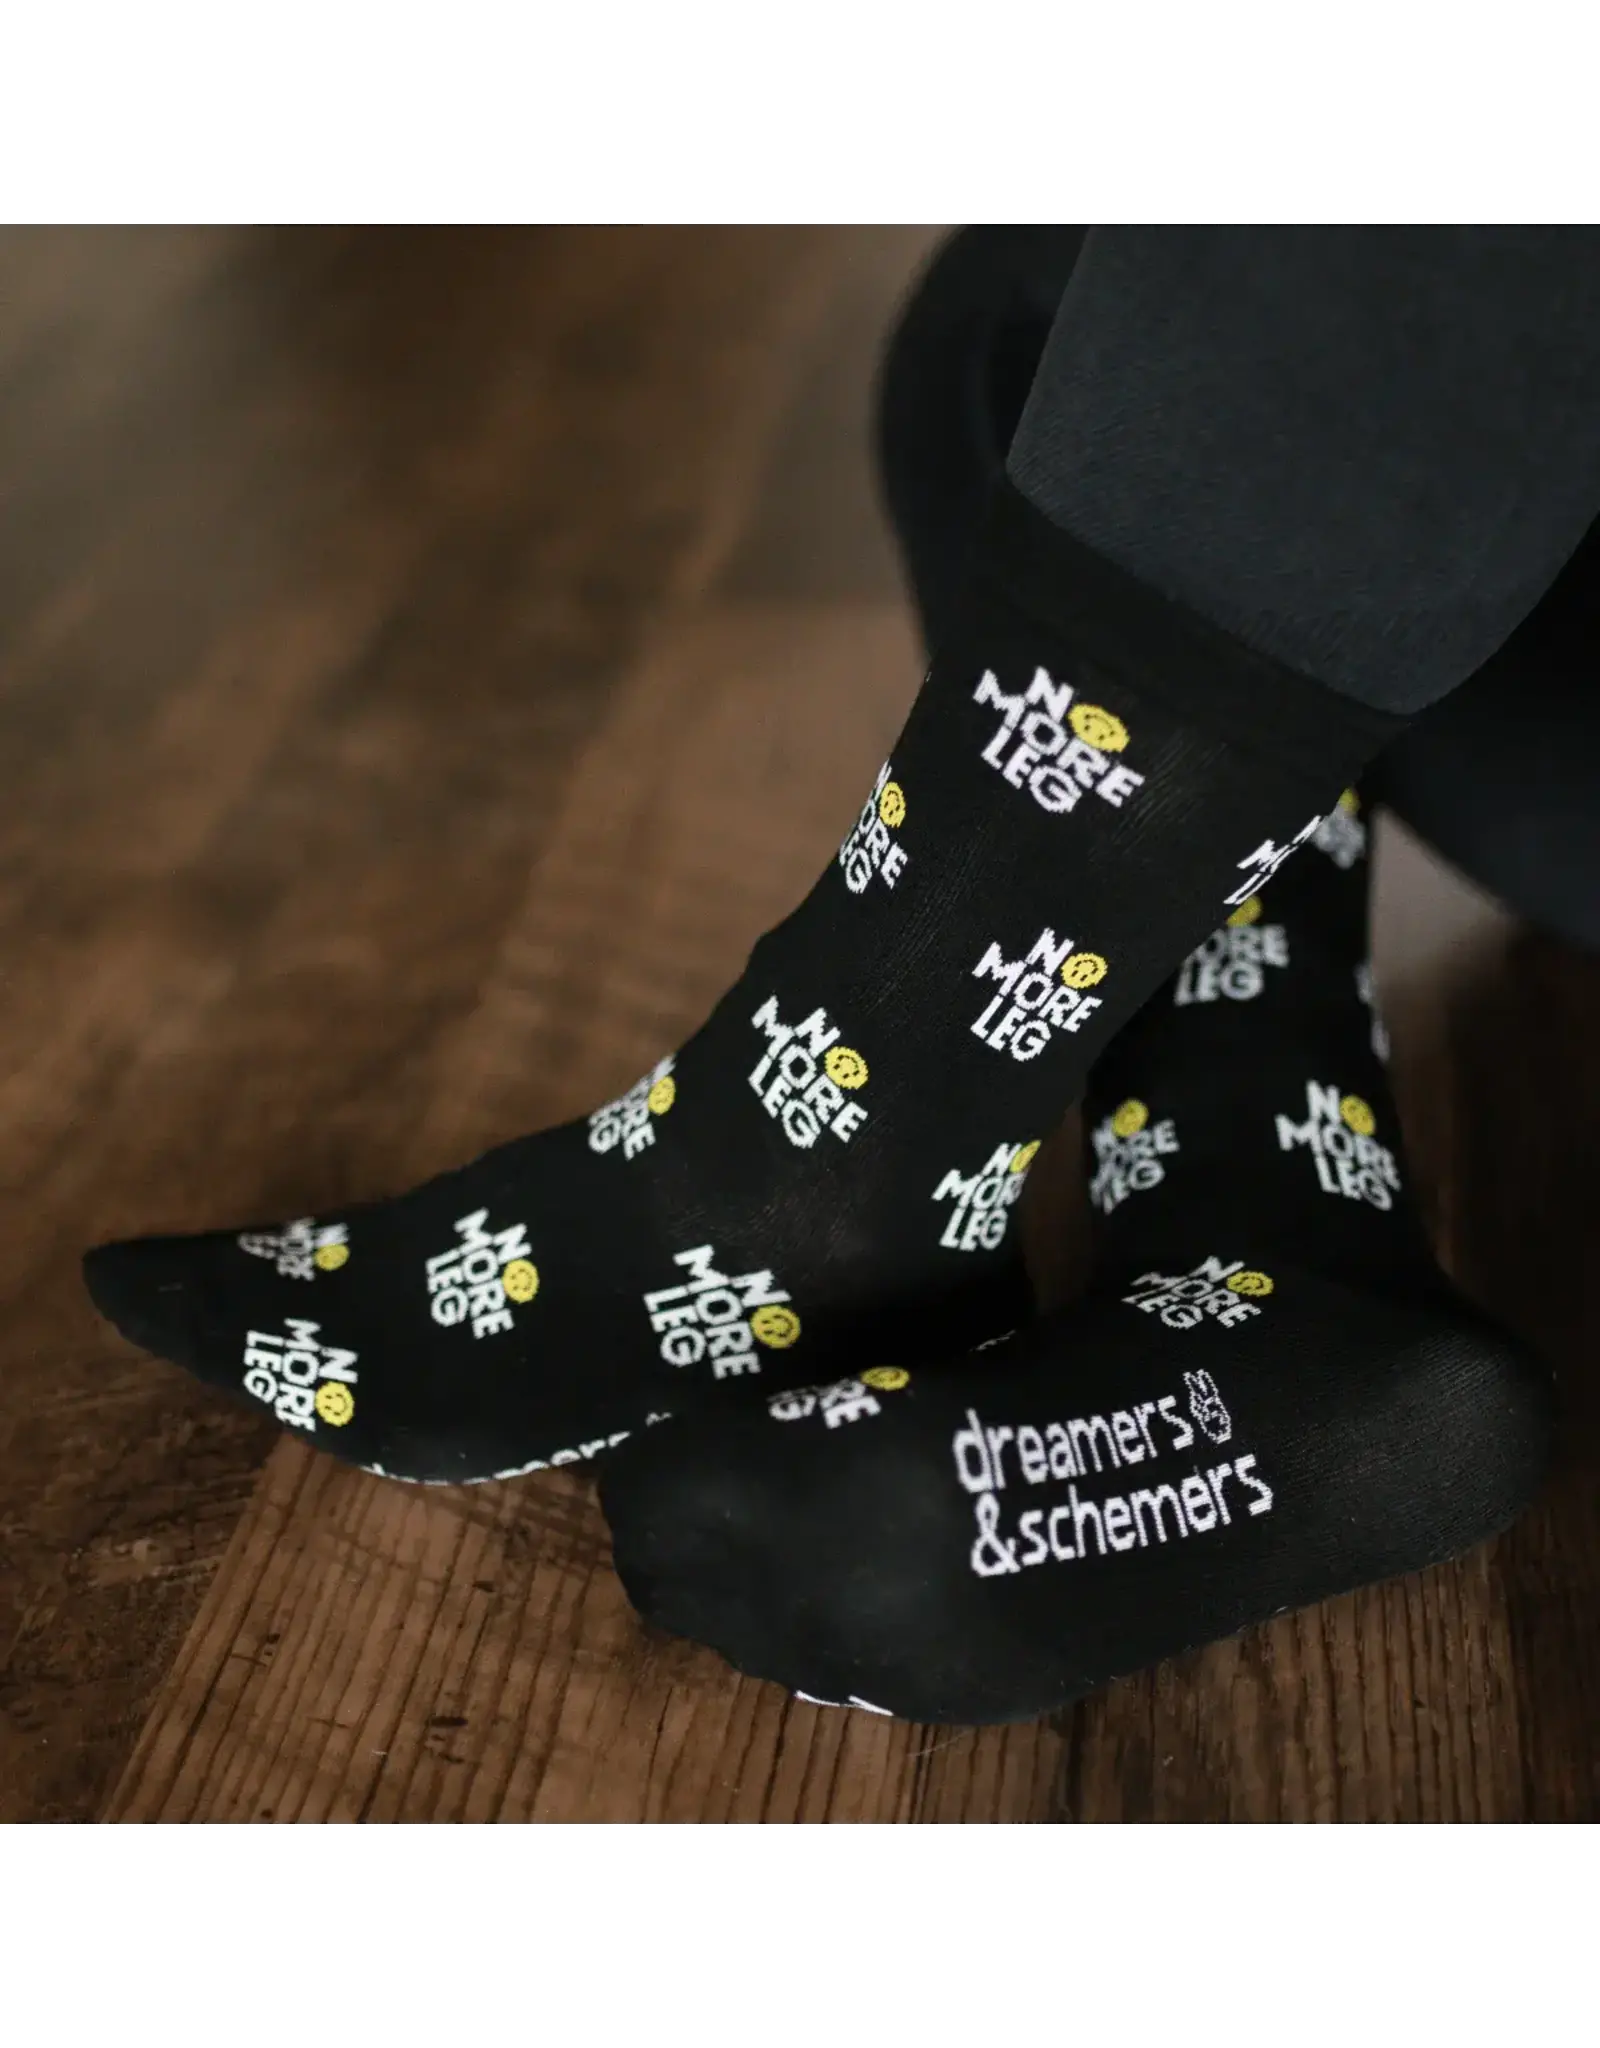 Dreamers and Schemers No More Leg Crew Socks Size 6-11